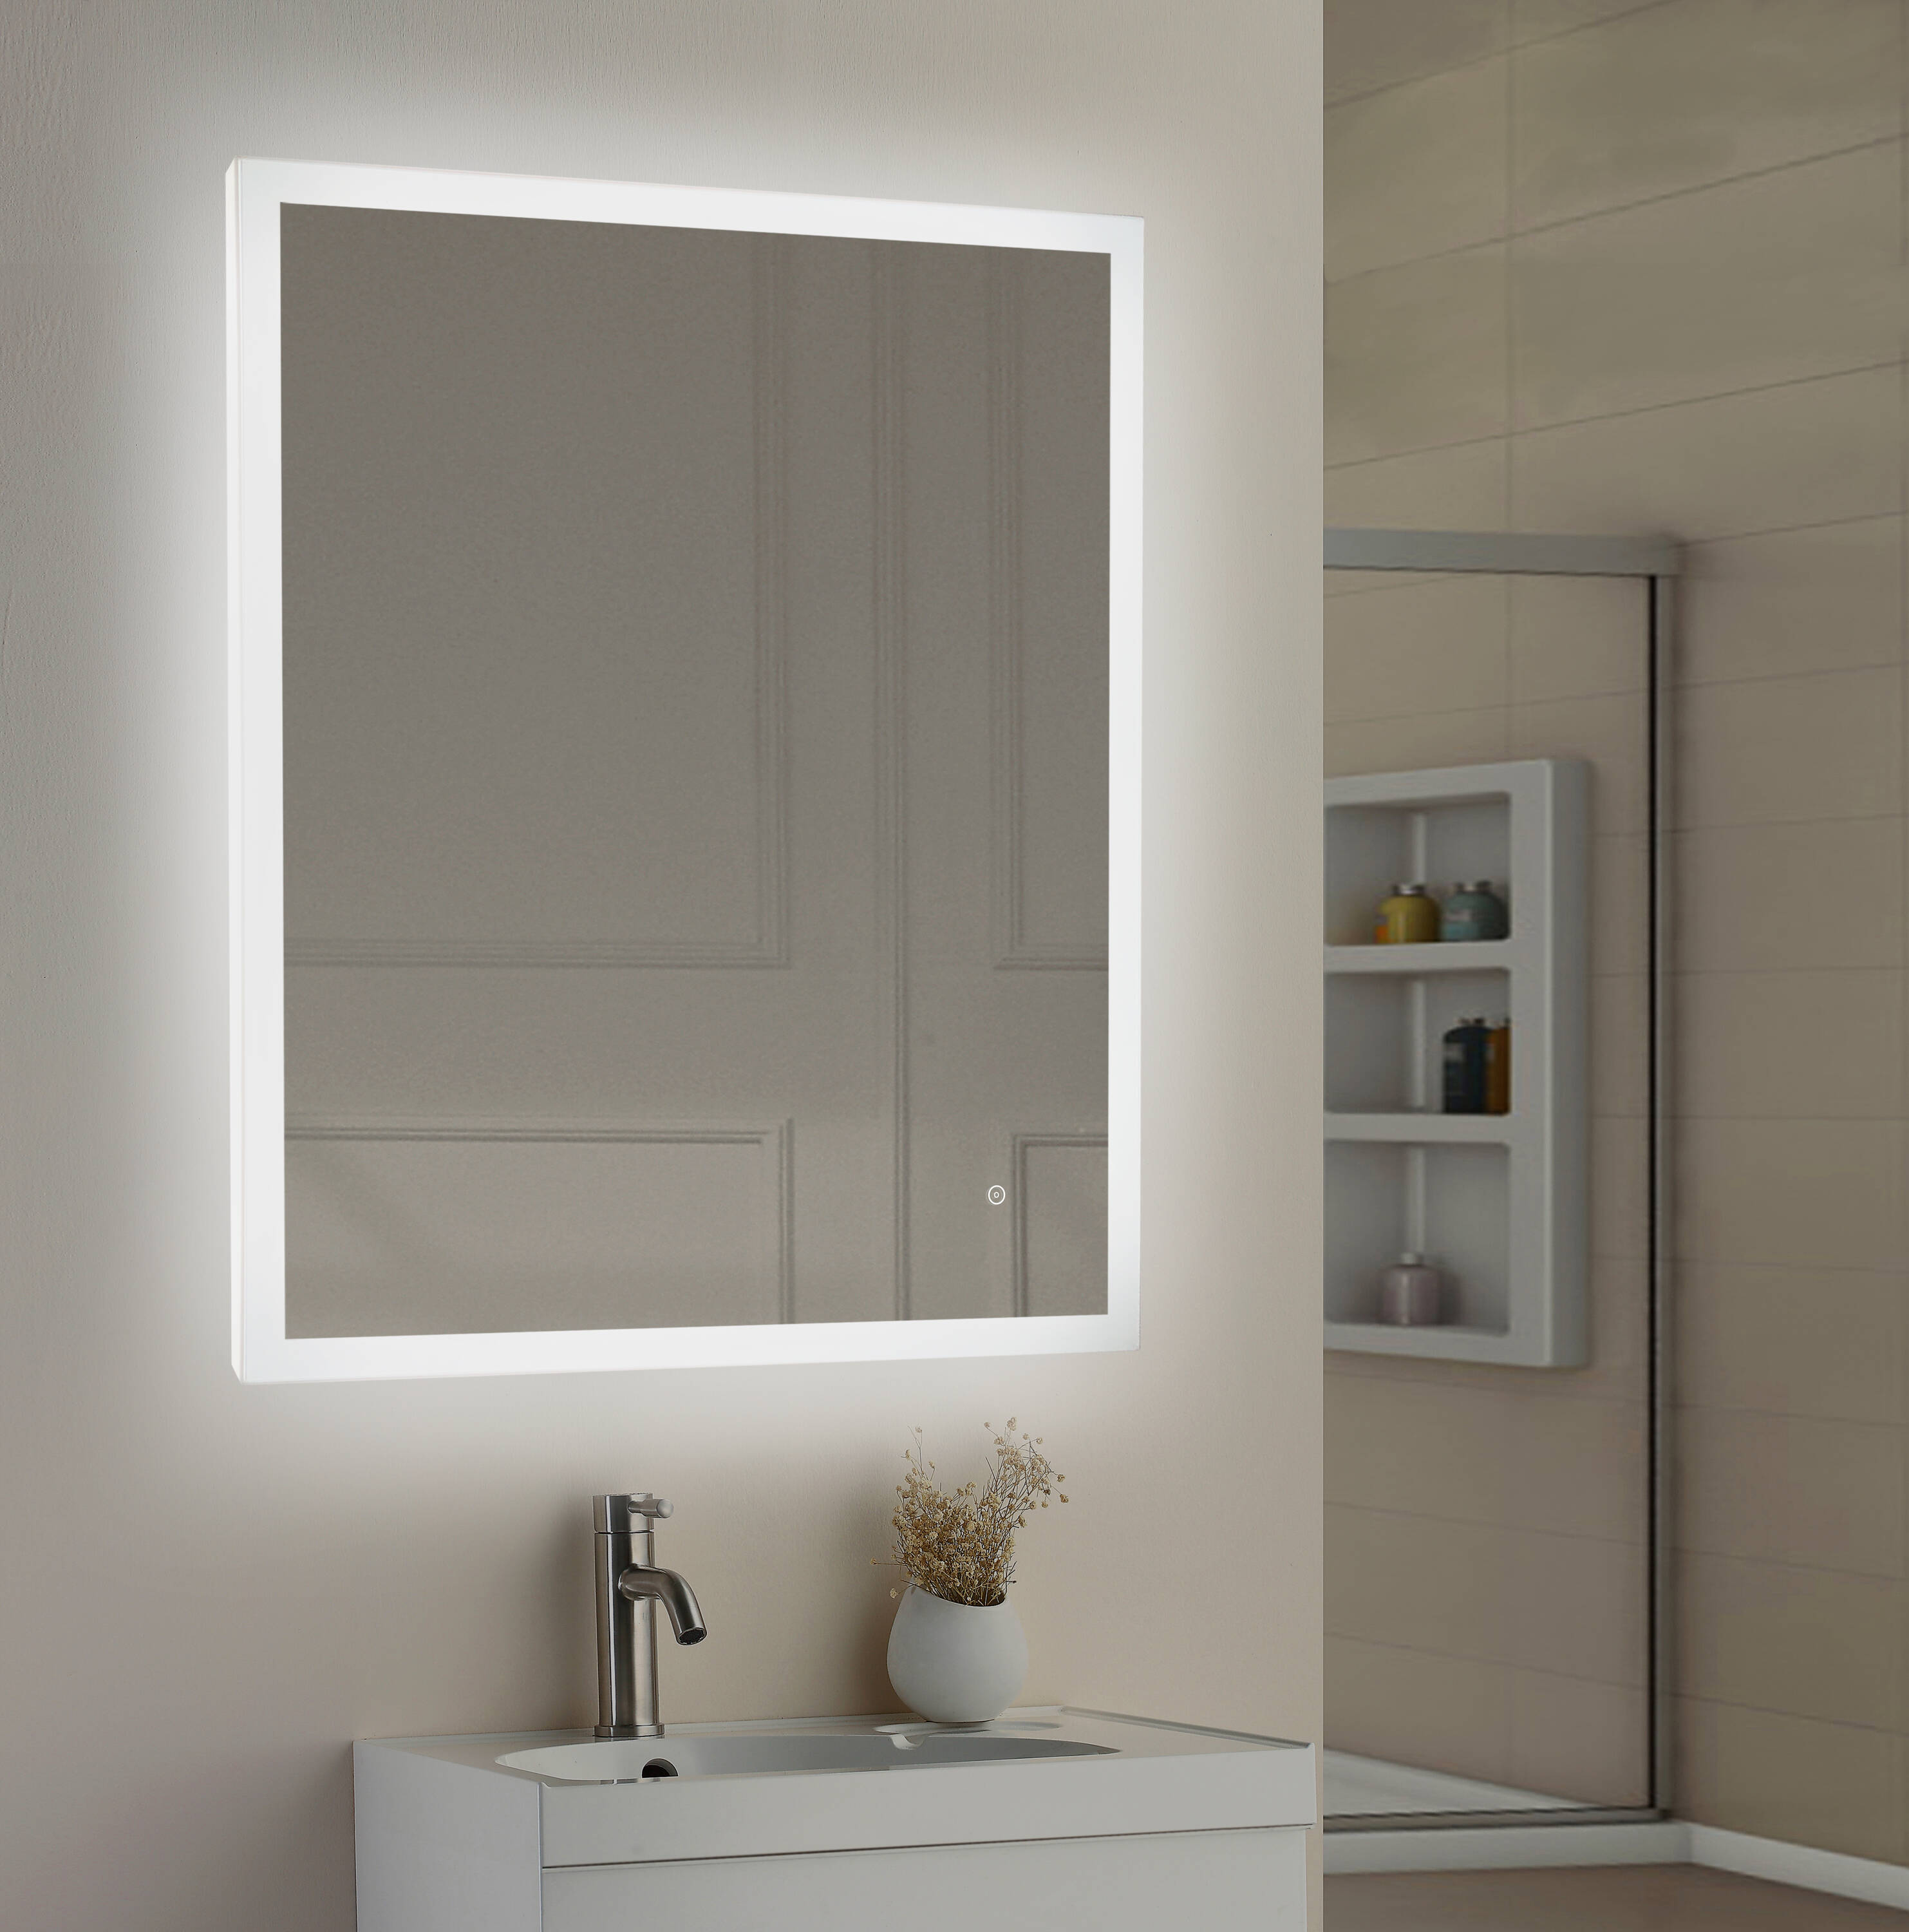 LOAAO 48X36 LED Bathroom Mirror with Lights, Anti-Fog, Dimmable, RGB  Backlit + Front Lighted, Bathroom Vanity Mirror for Wall, Memory Function